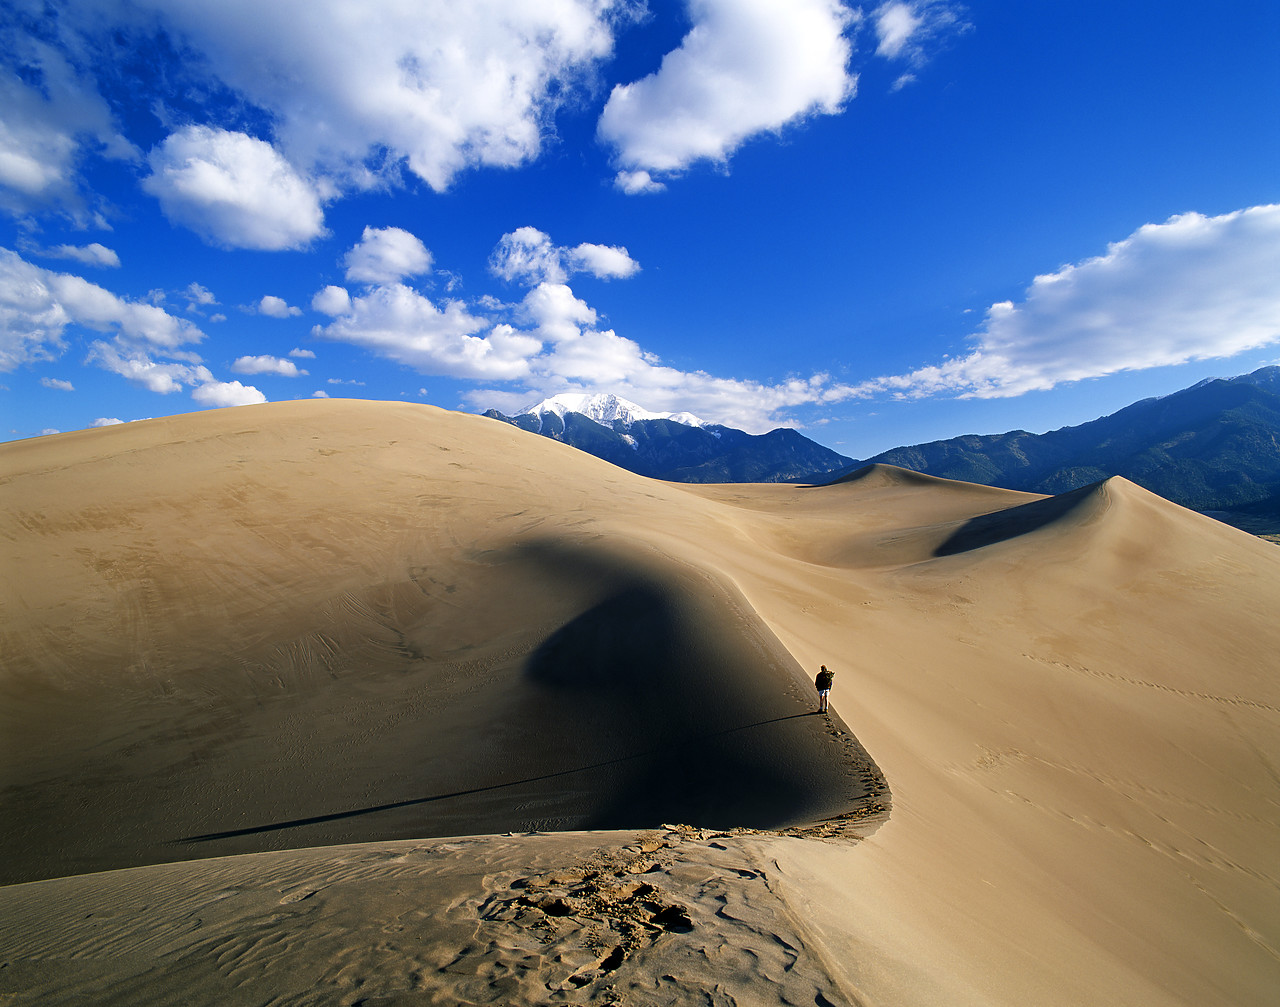 #990679-3 - Hiker on Sand Dunes, Great Sand Dunes National Monument, Colorado, USA